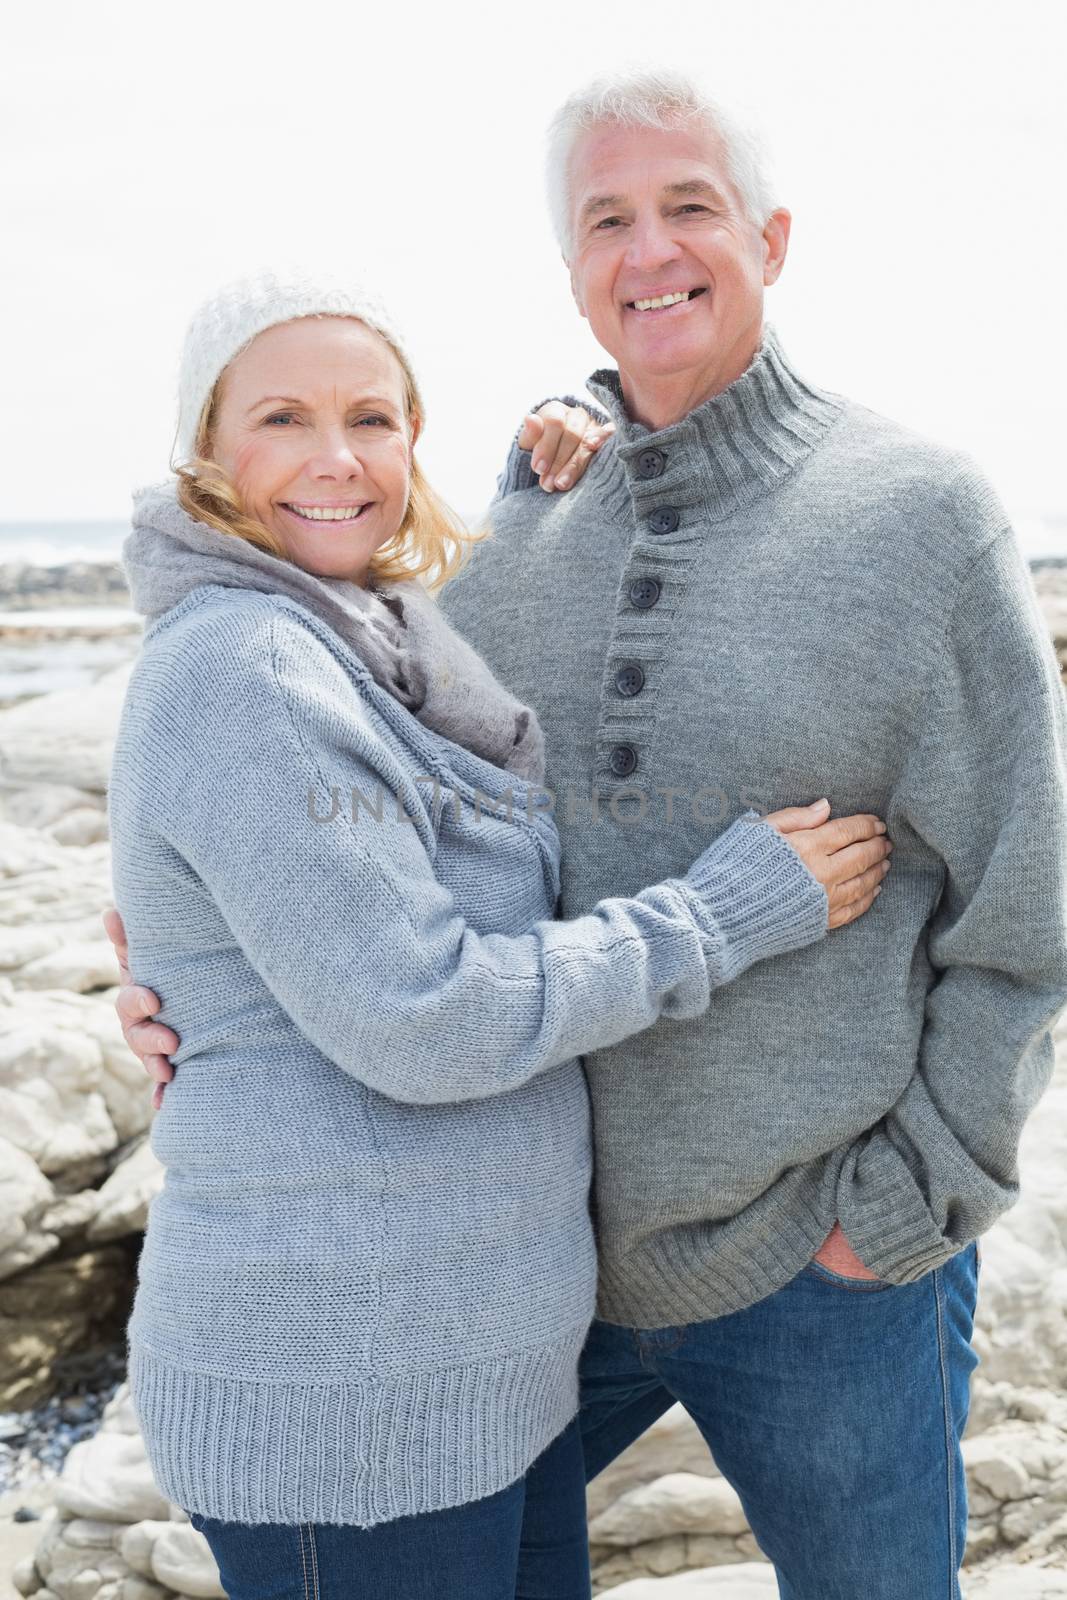 Romantic senior couple standing together on a rocky beach